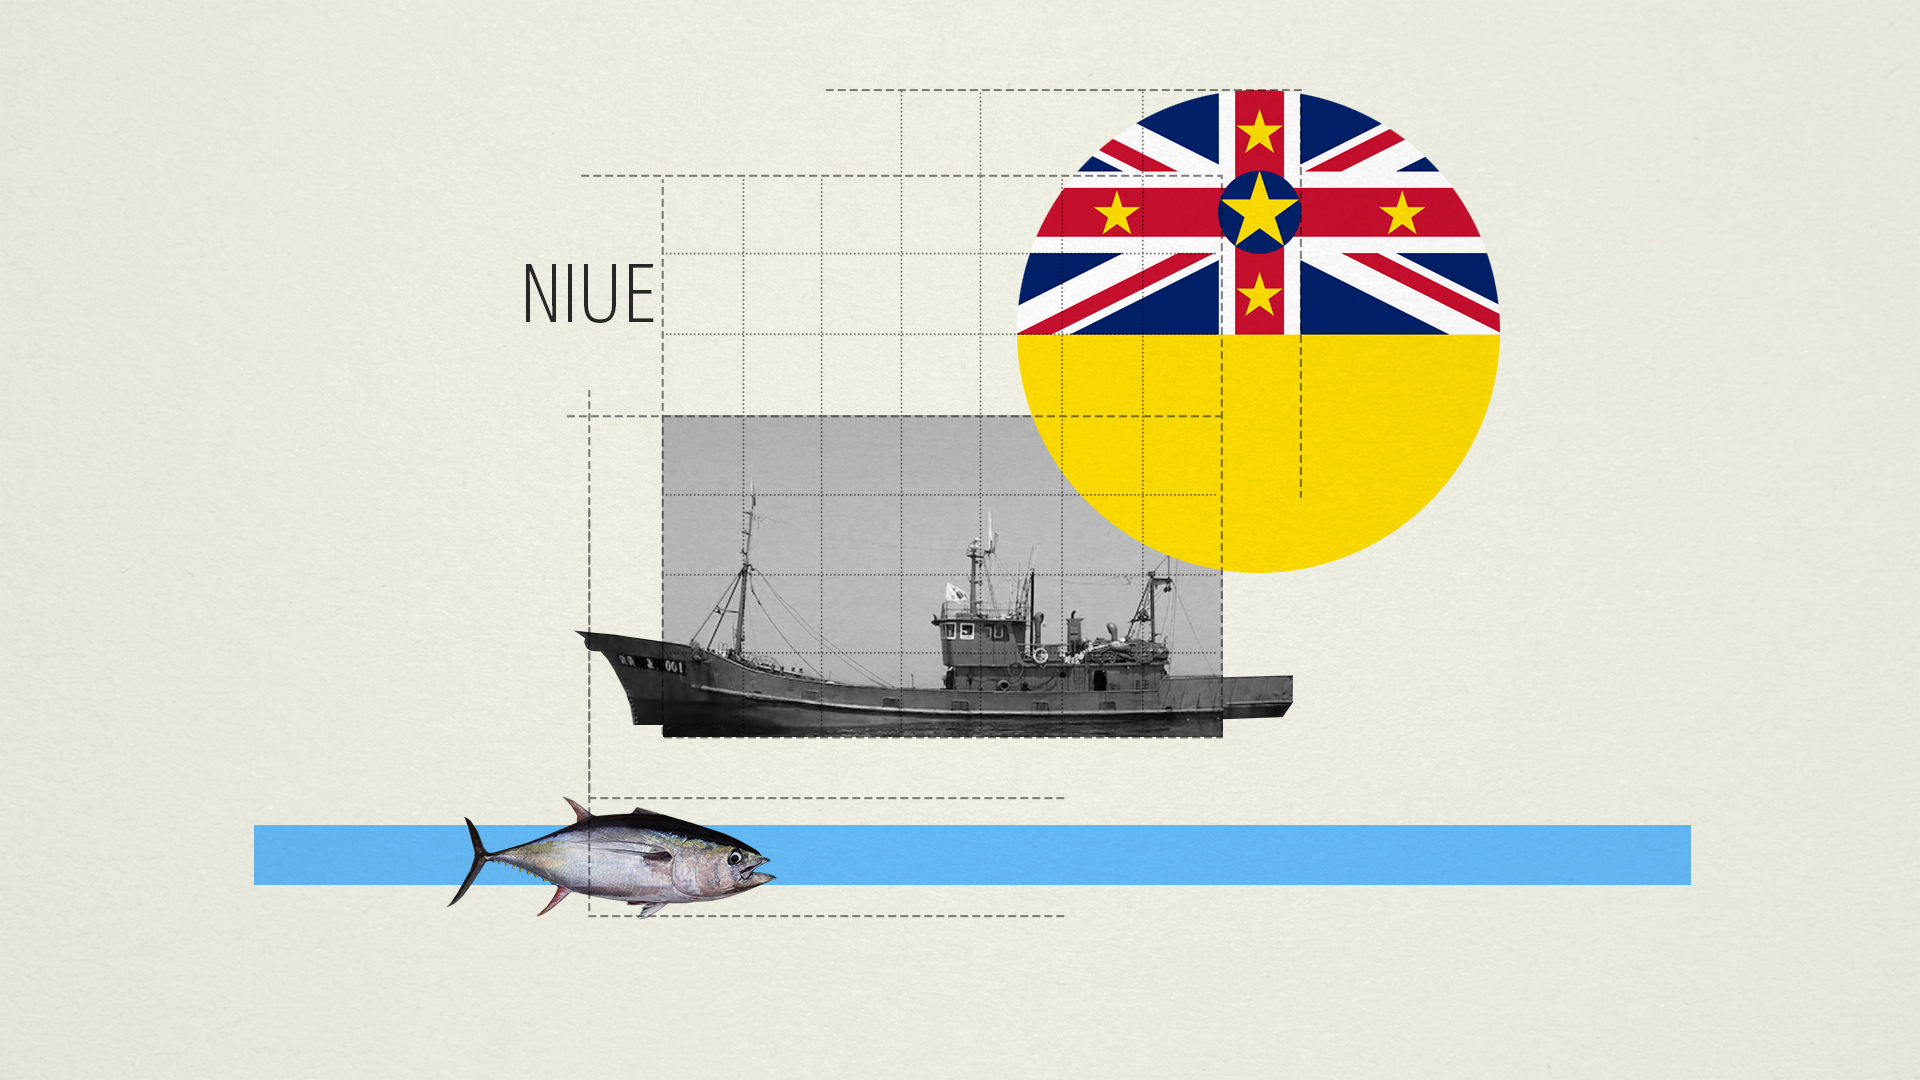 An image of the Niue flag, a fish in a strip of blue, and a black and white ship.